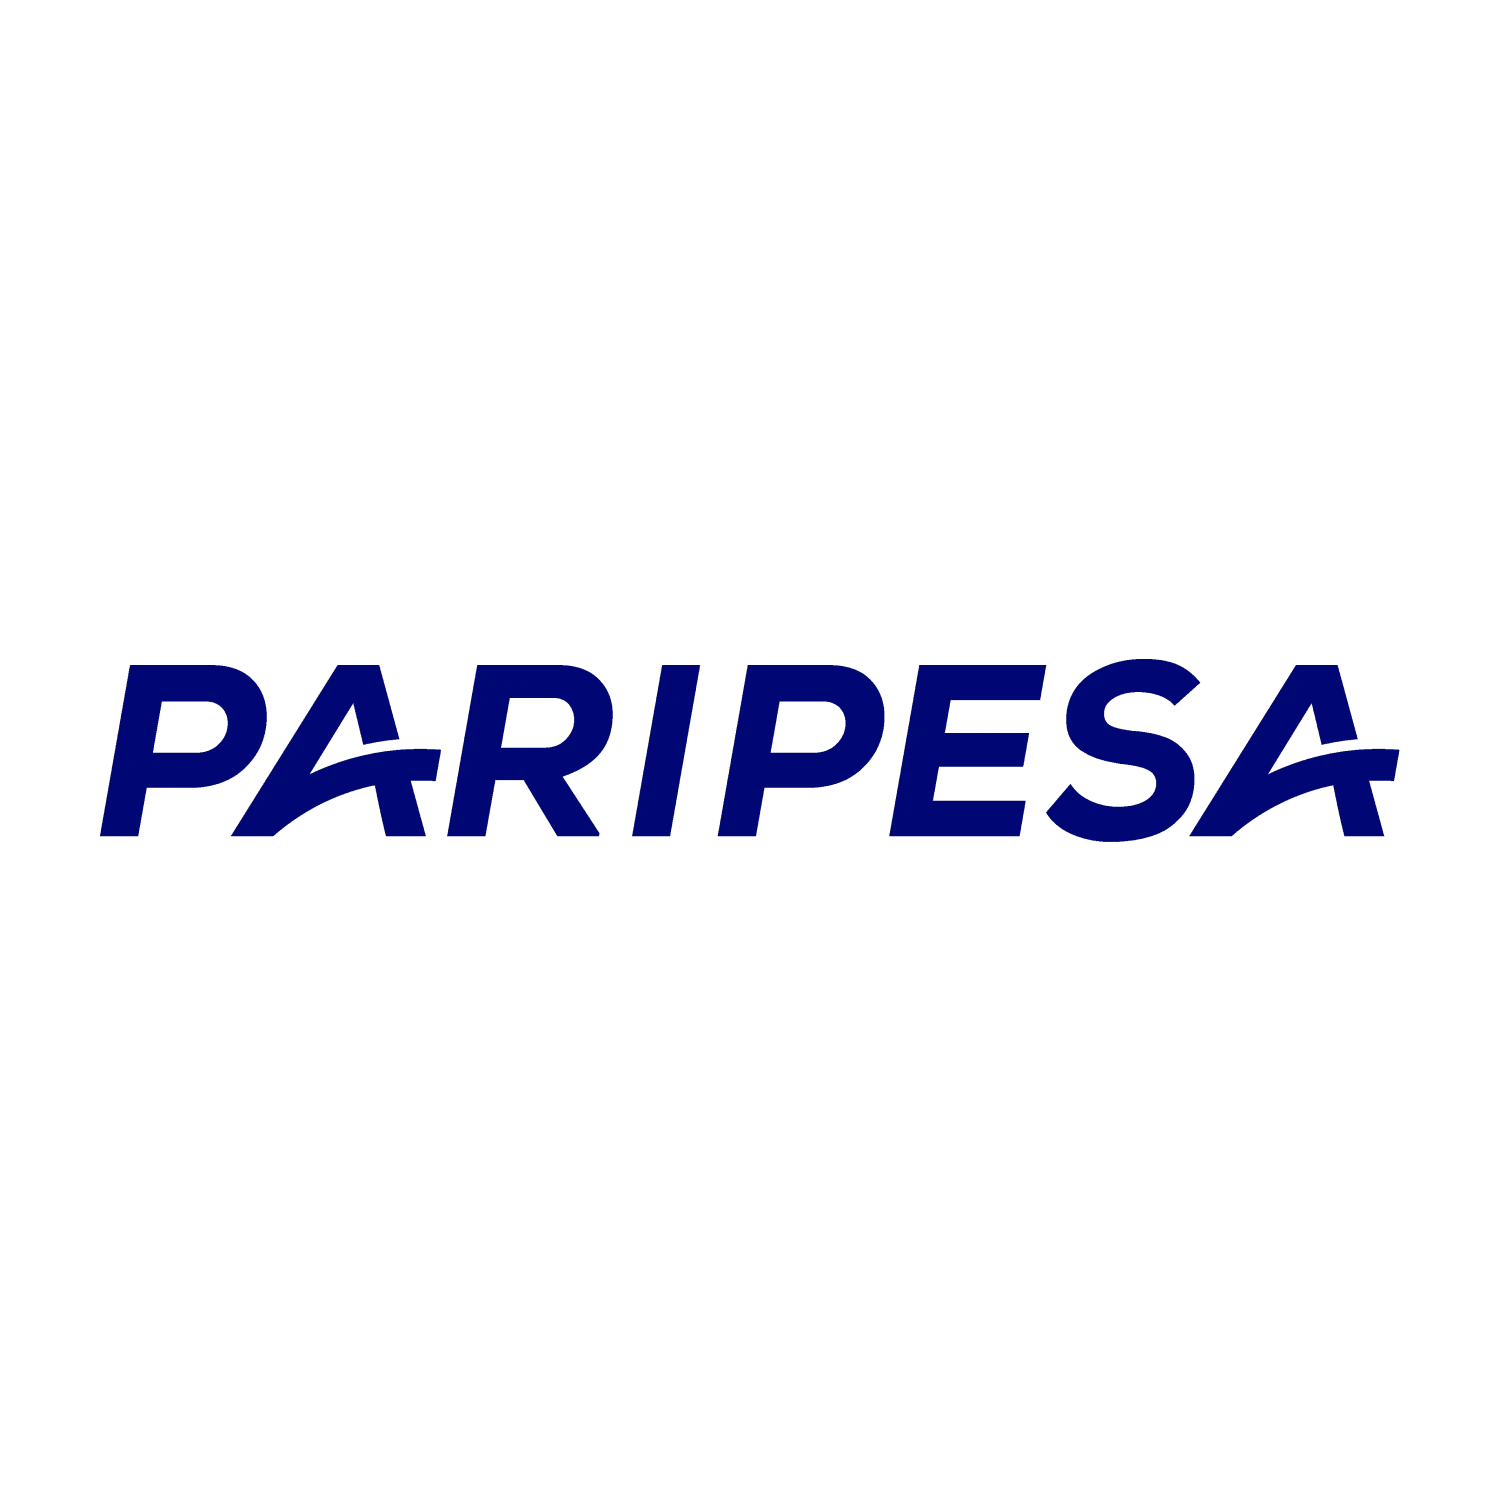 In this article, you find information on how to bet on sports and play casino games at Paripesa.